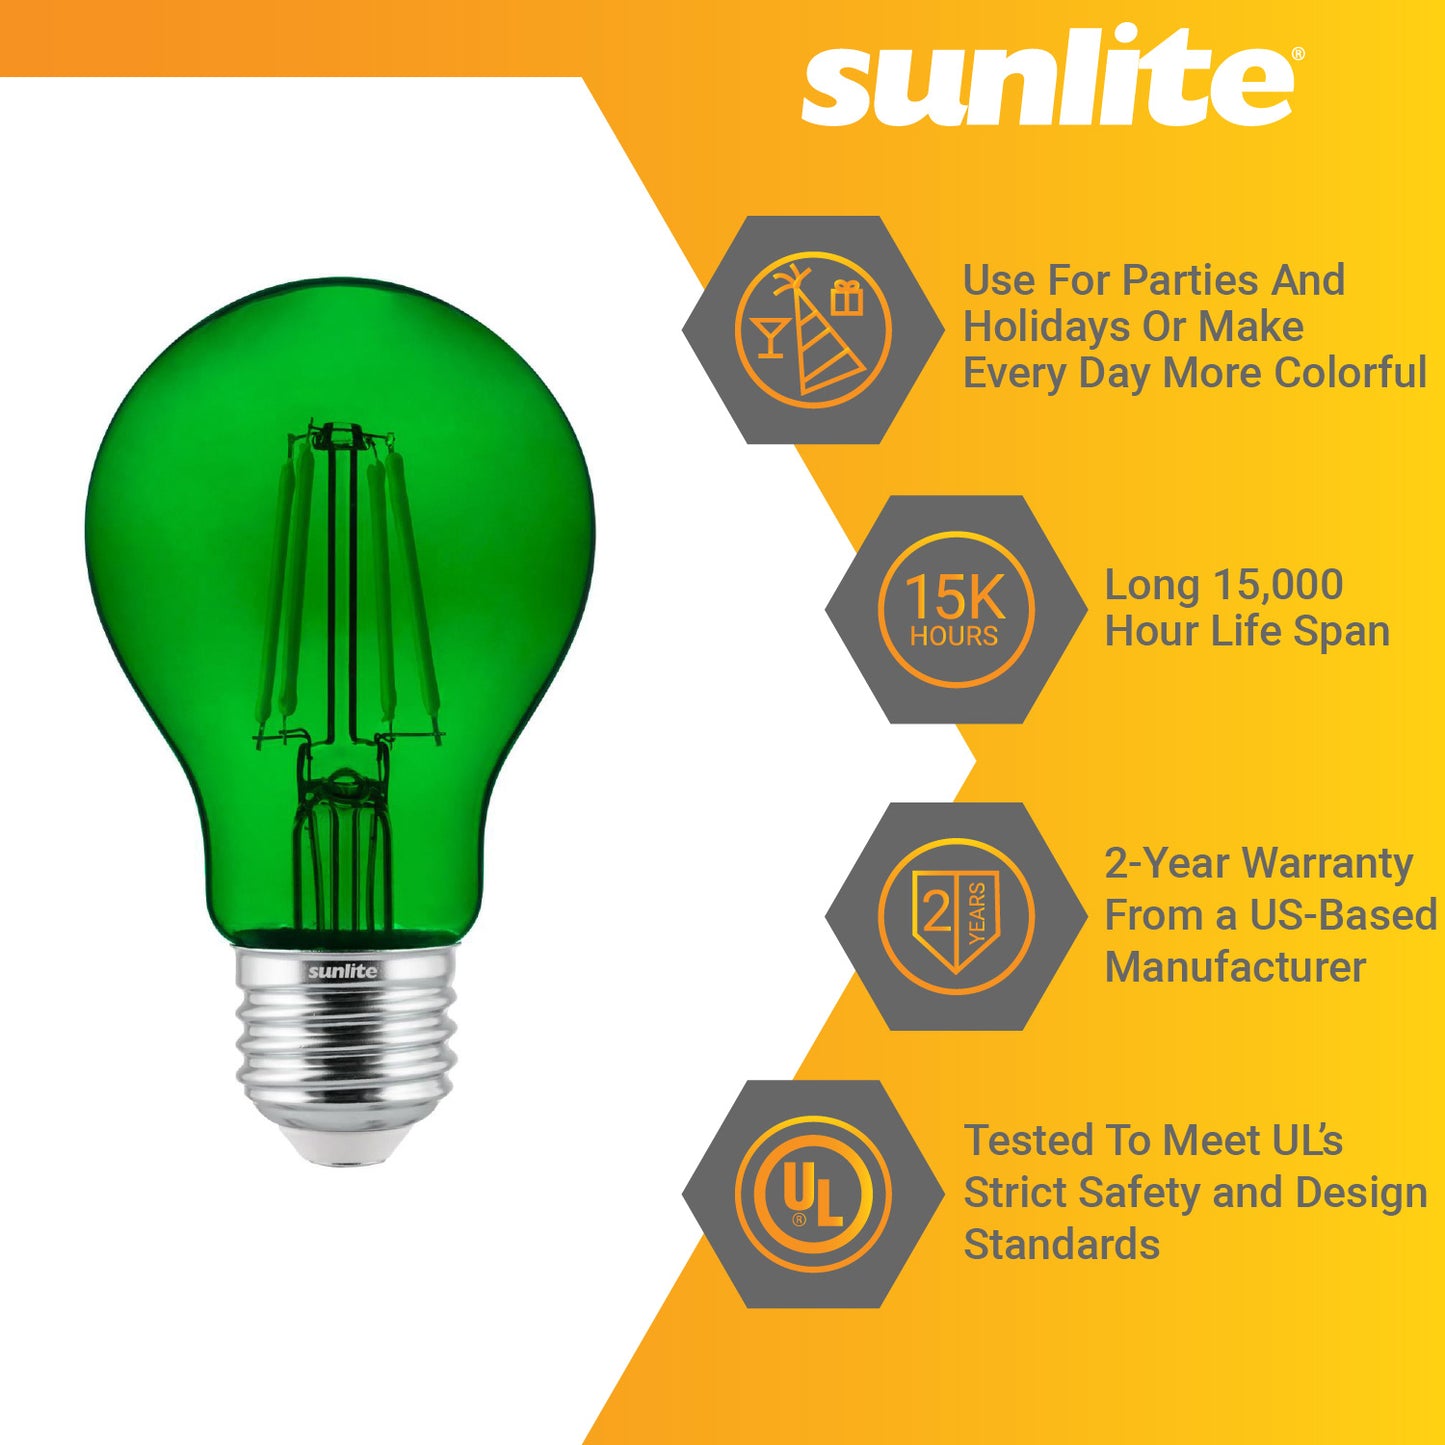 2-Pack Sunlite LED Transparent Green A19 Filament Bulbs, 4.5 Watts, Dimmable, UL Listed